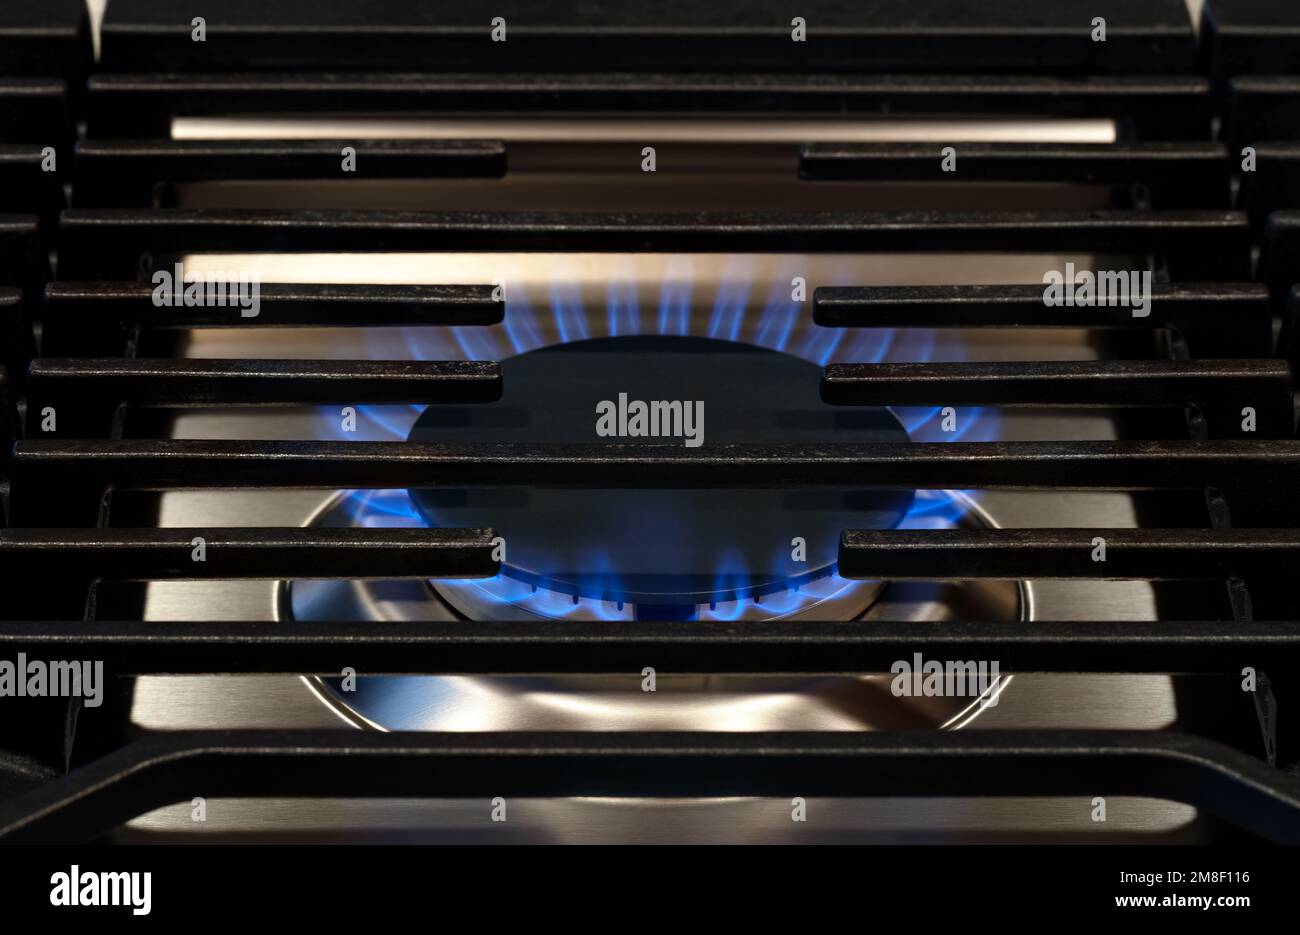 Modern Kitchen stove top cook. Gas flame close up on a natural gas stove range burner with metal grill Stock Photo